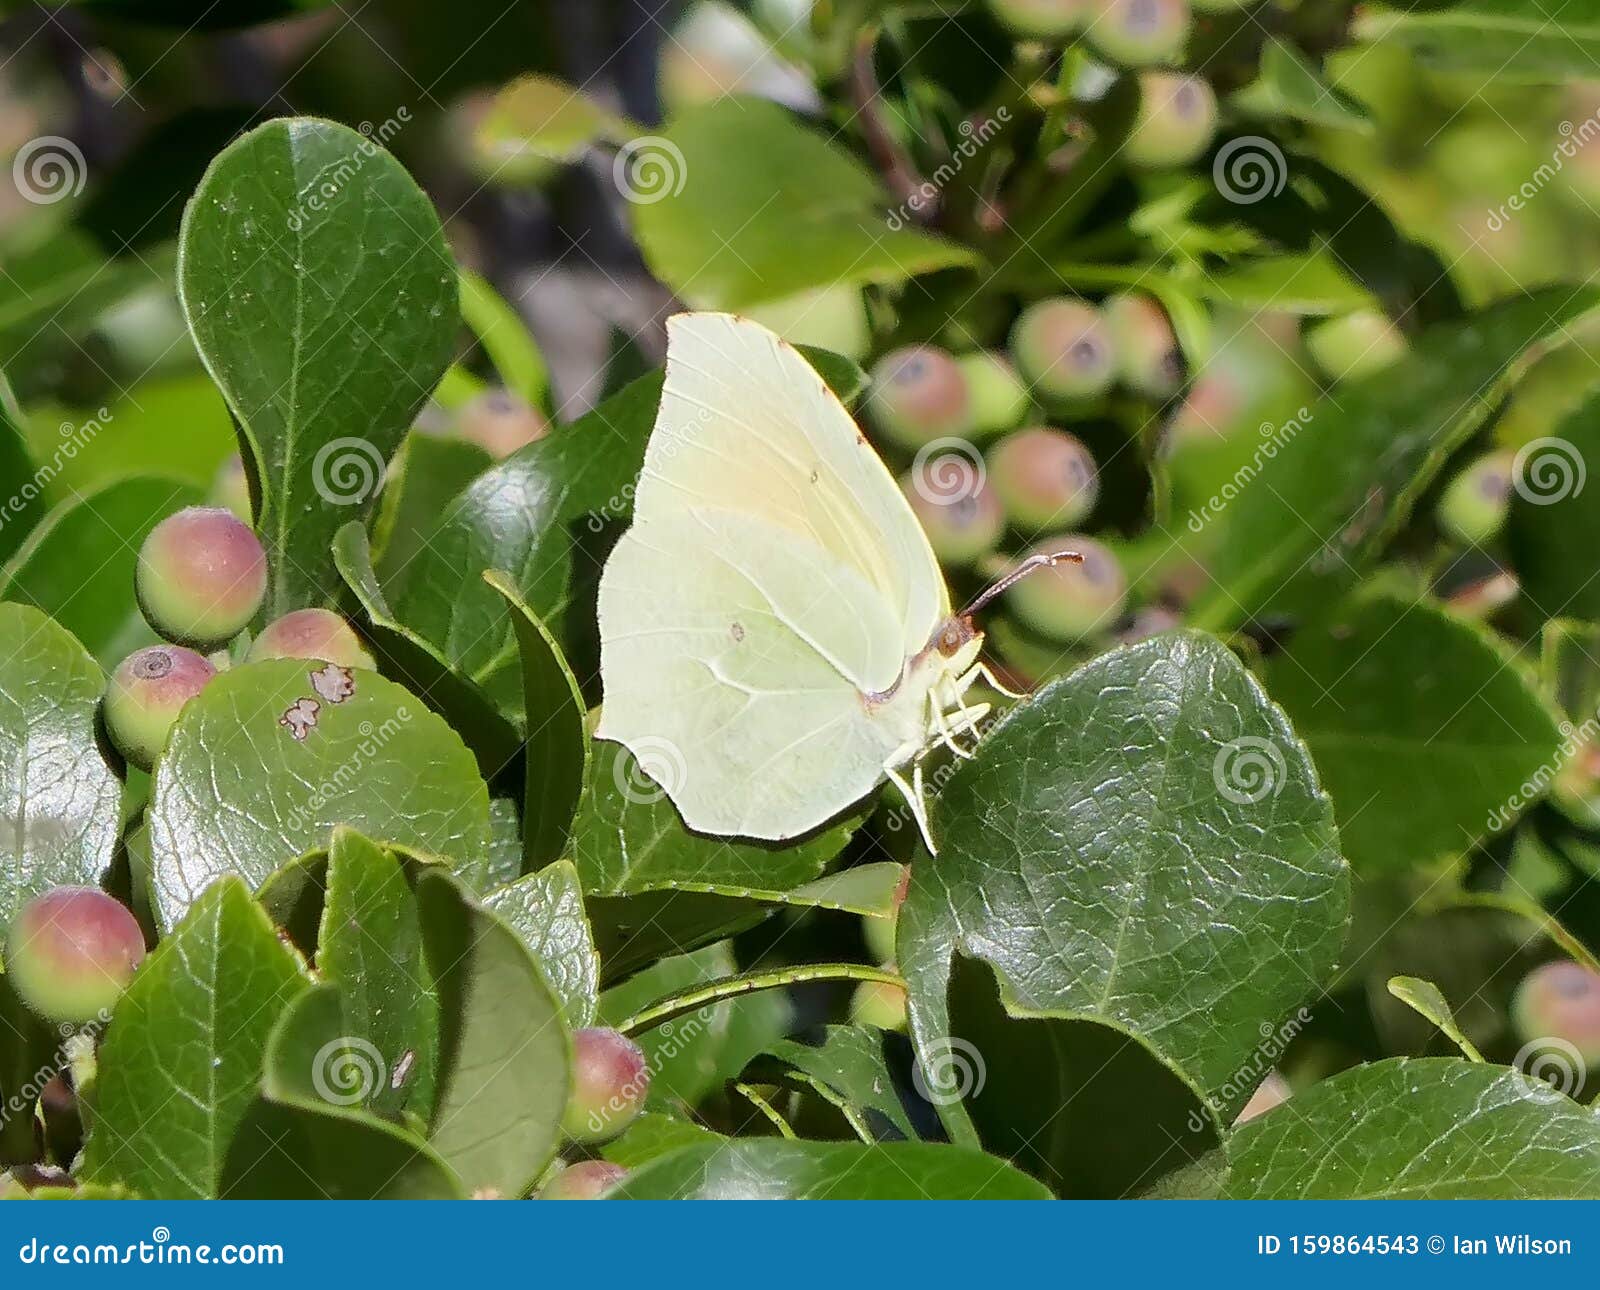 Pale green Butterfly Image of -